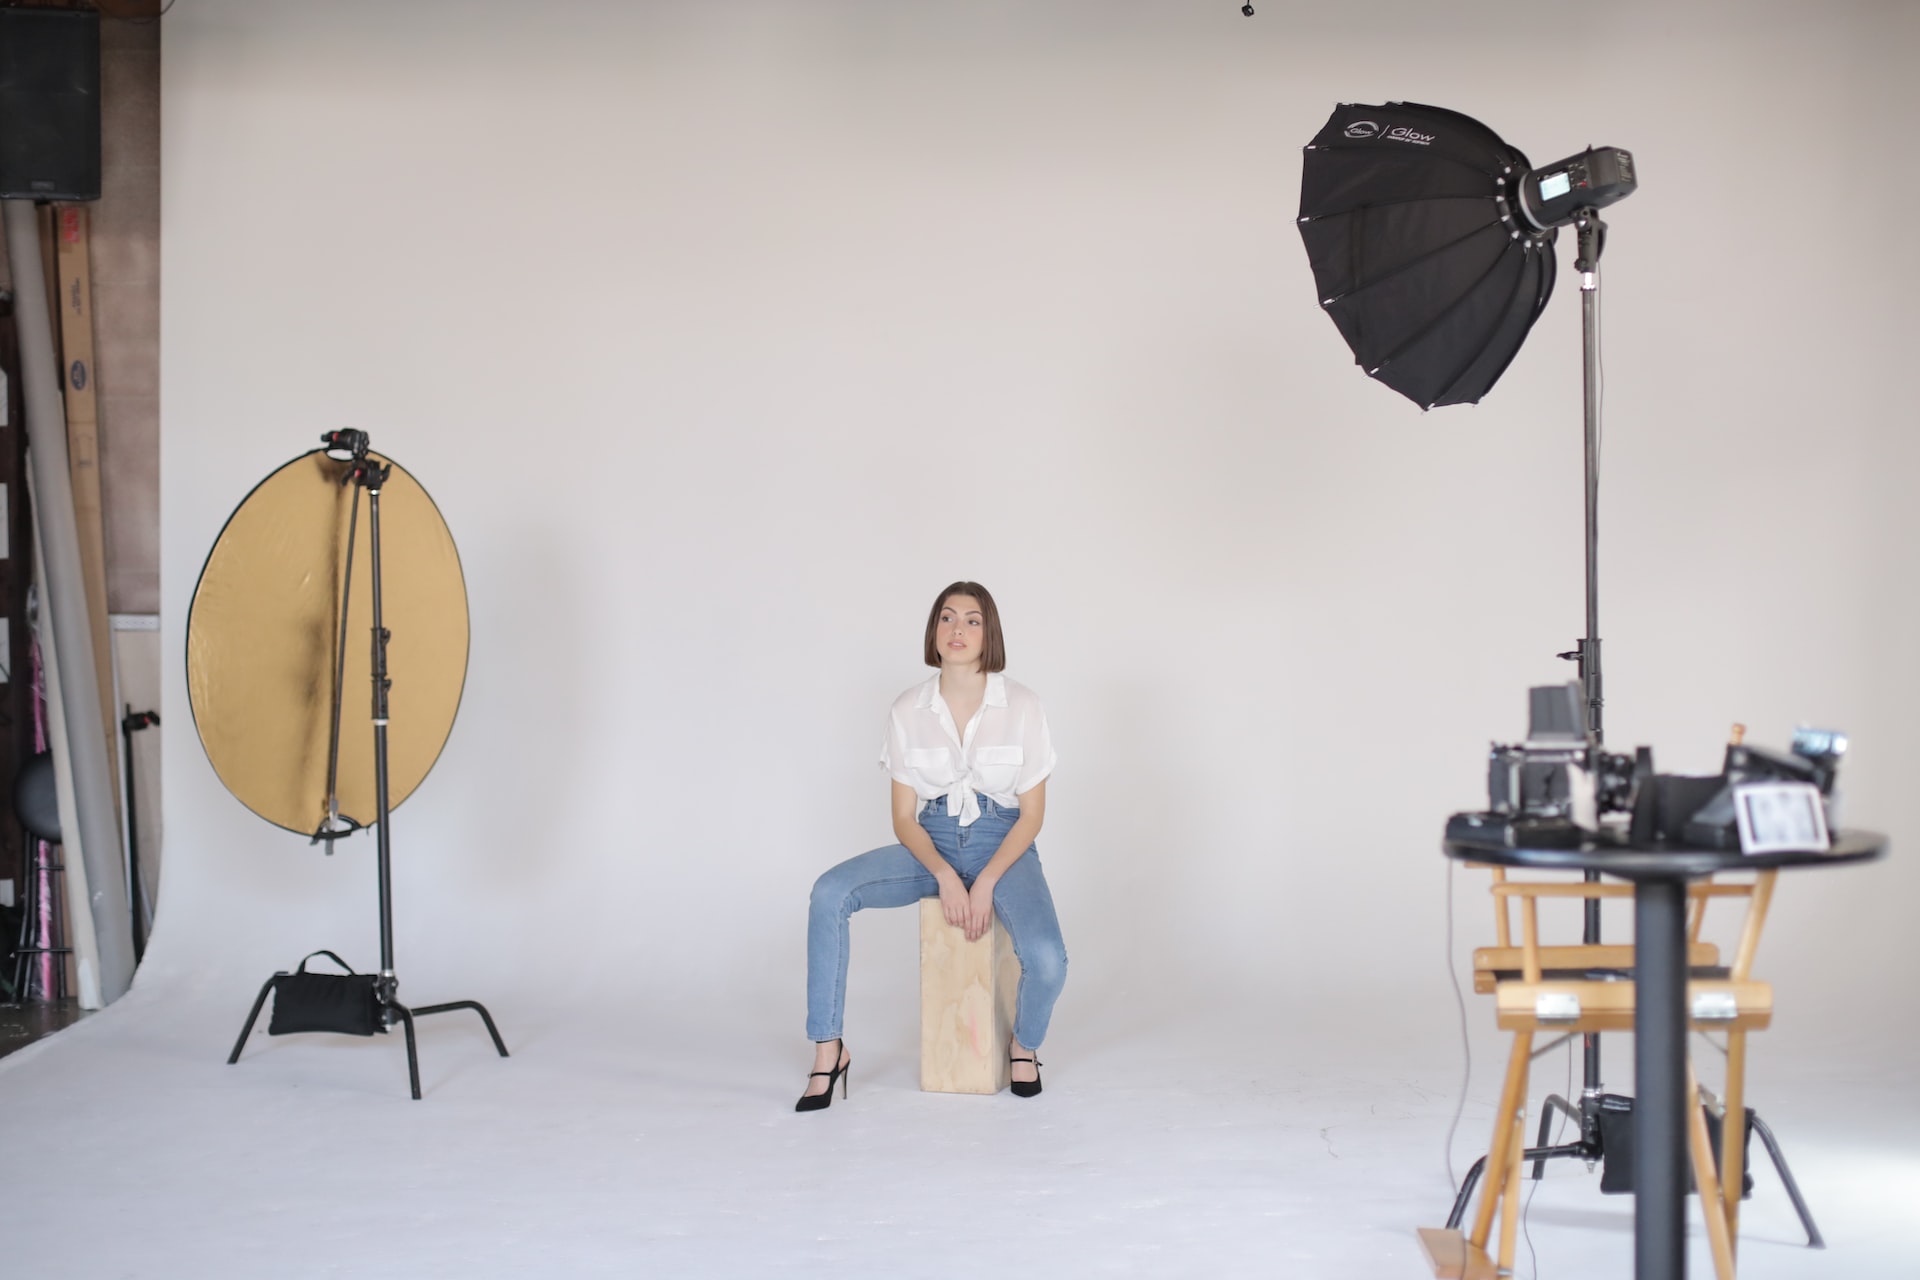 A woman getting ready to have her photo taken at a studio